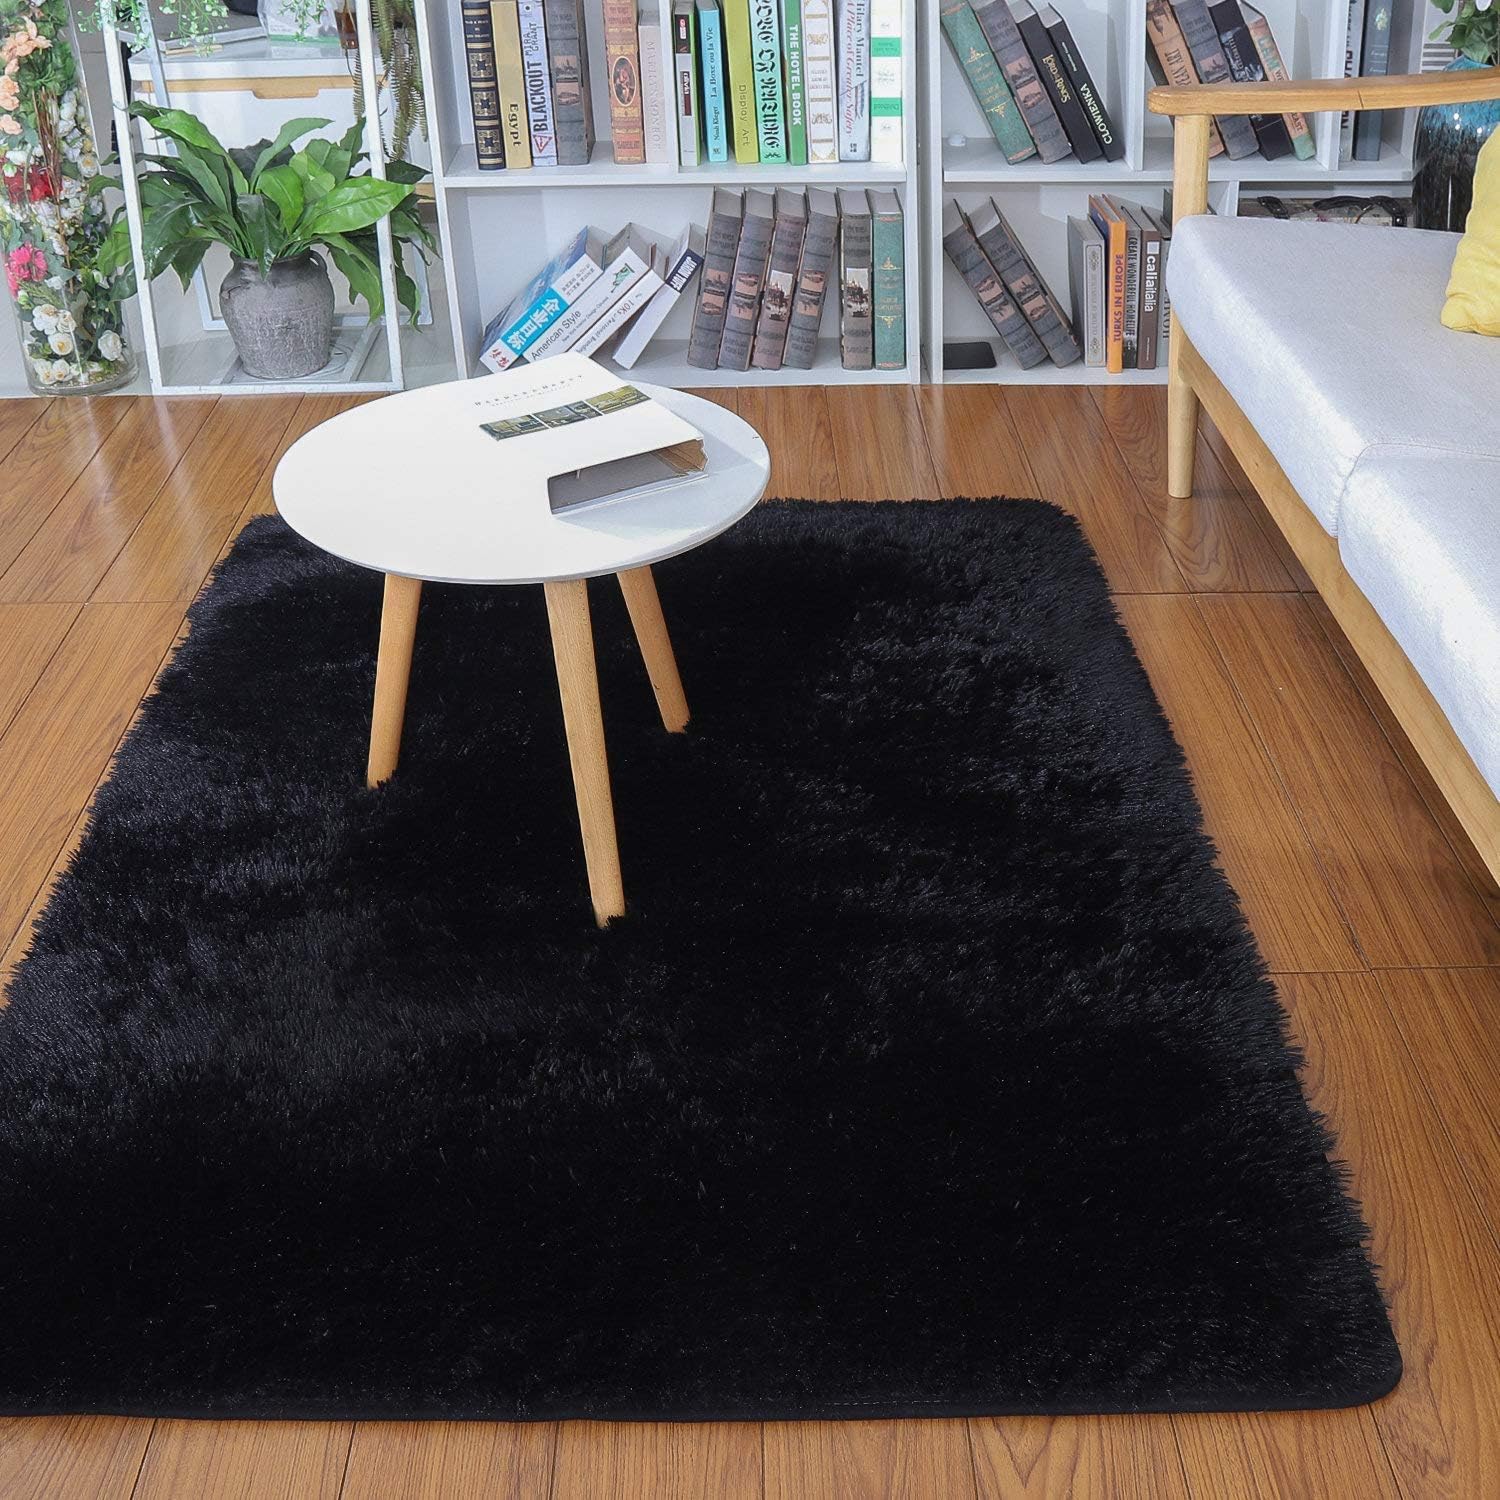 For the price per foot, this is a nice decent rug. Nothing necessarily special. But it is soft and serves it' purpose. Holds well on the hard wood floor, doesn't budge too easily, and should be able to go for a soft cycle in the wash.